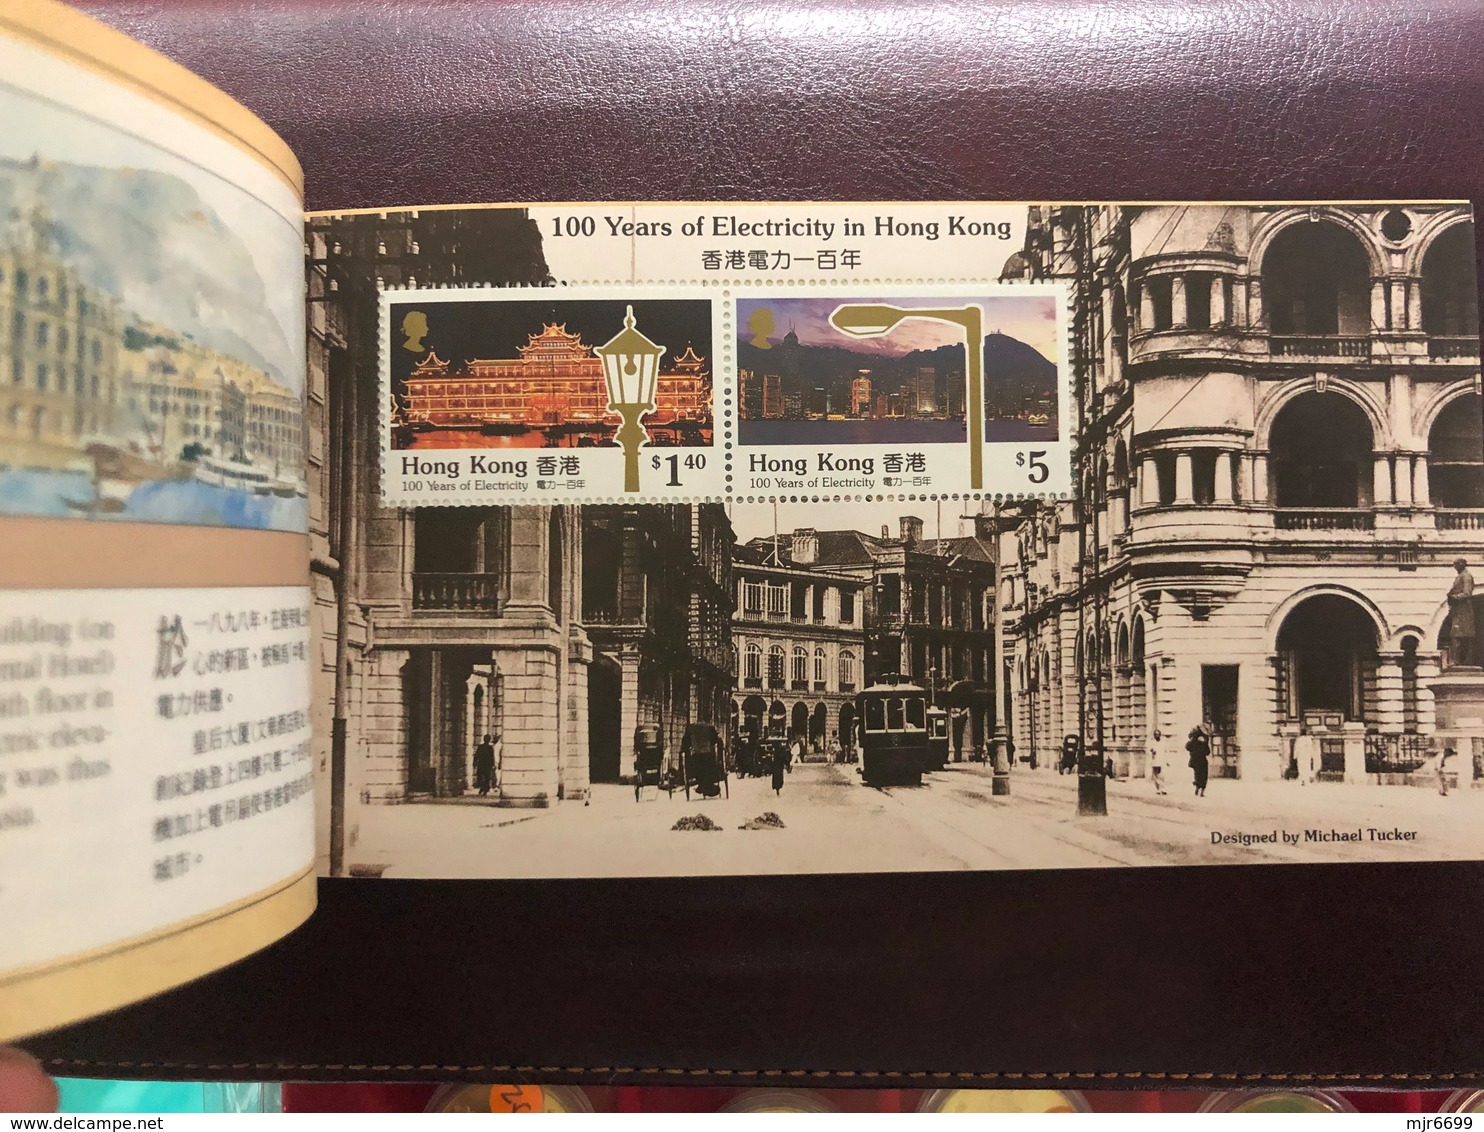 1990 HONG KONG ELECTRIC 100 YEARS COMMEMORATIVE BOOKLET - Booklets